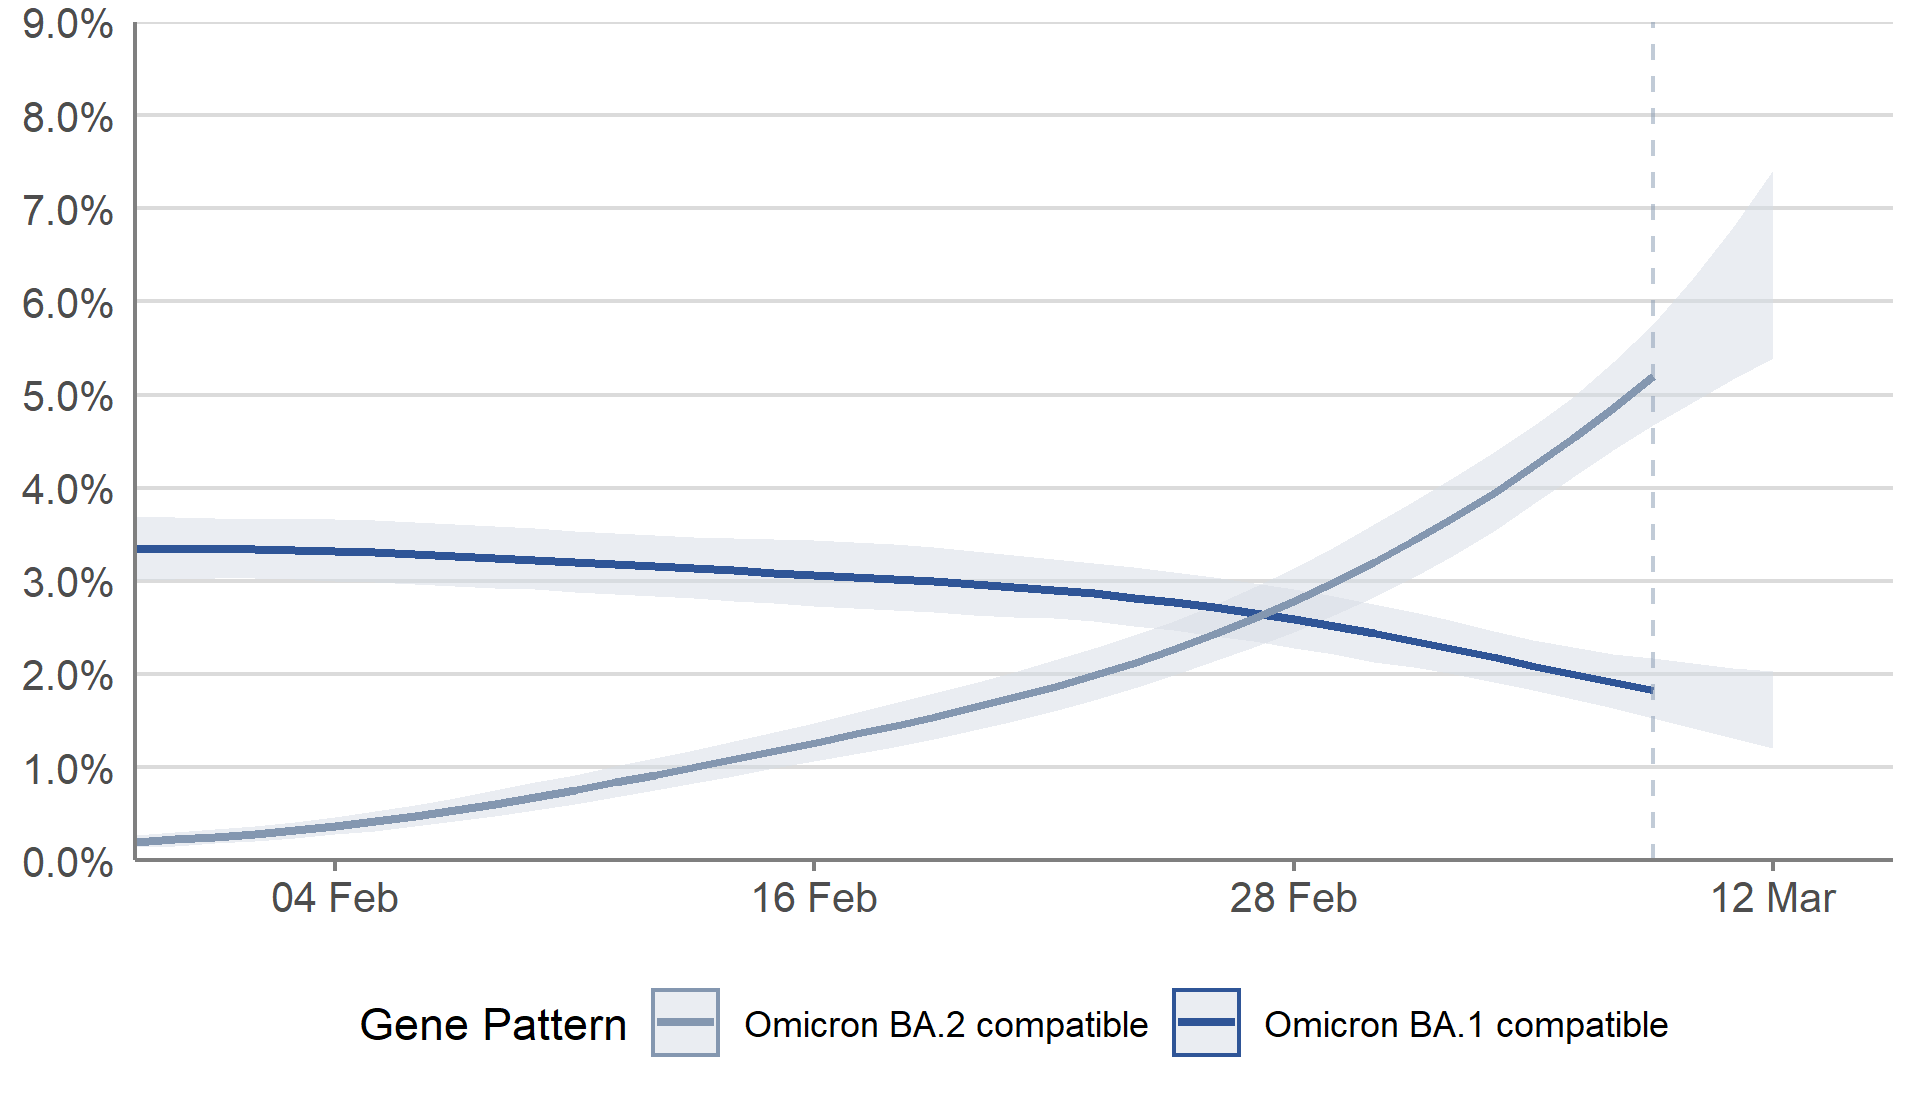 In Scotland, the percentage of infections compatible with Omicron BA.2 has increased in the most recent week. The percentage of infections compatible with Omicron BA.1 has decreased in the week to 12 March 2022.